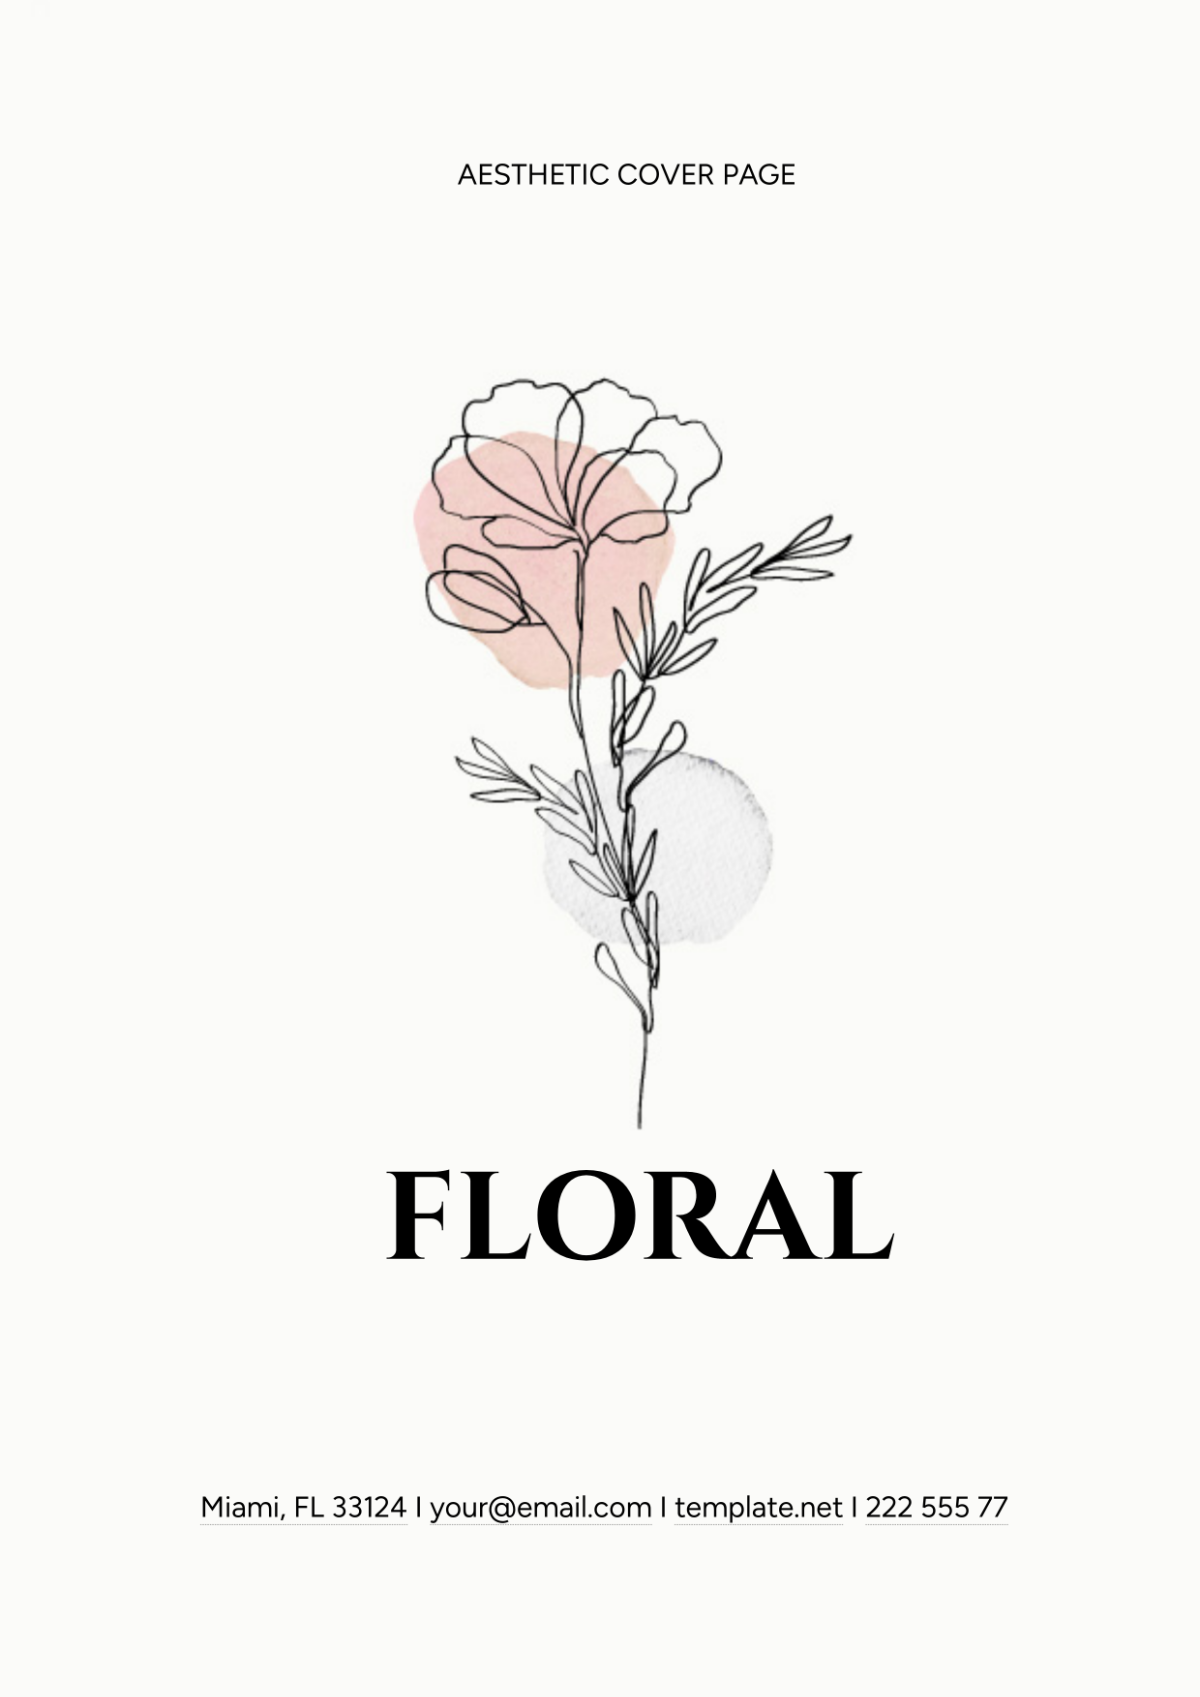 Floral Aesthetic Cover Page Template